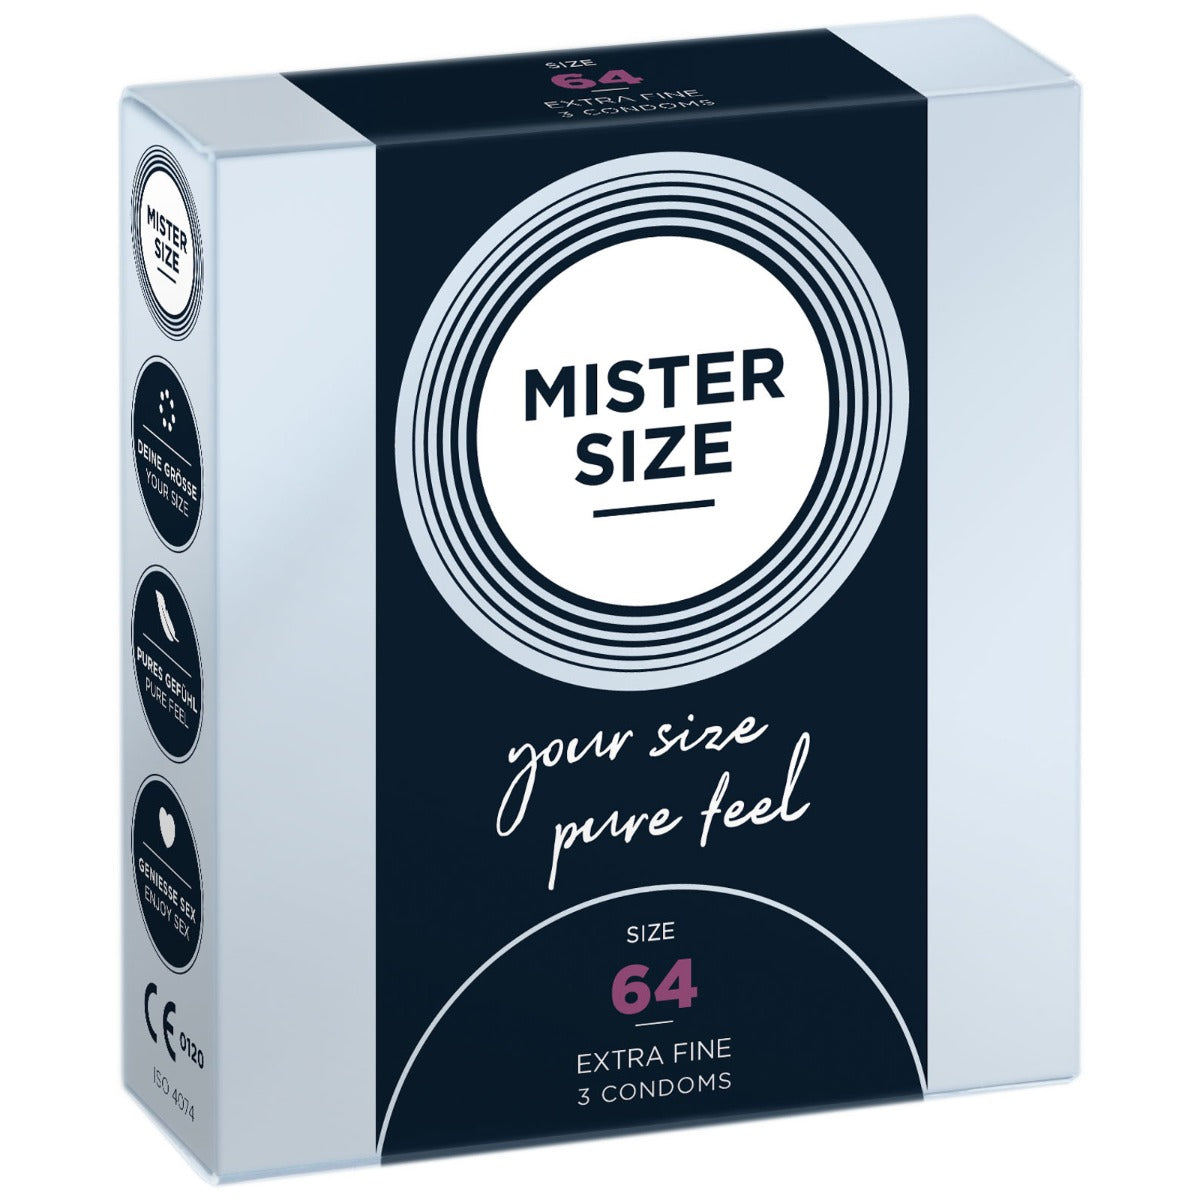 Condoms MISTER SIZE - pure feel Condoms - Size 64 mm (3 pack)   